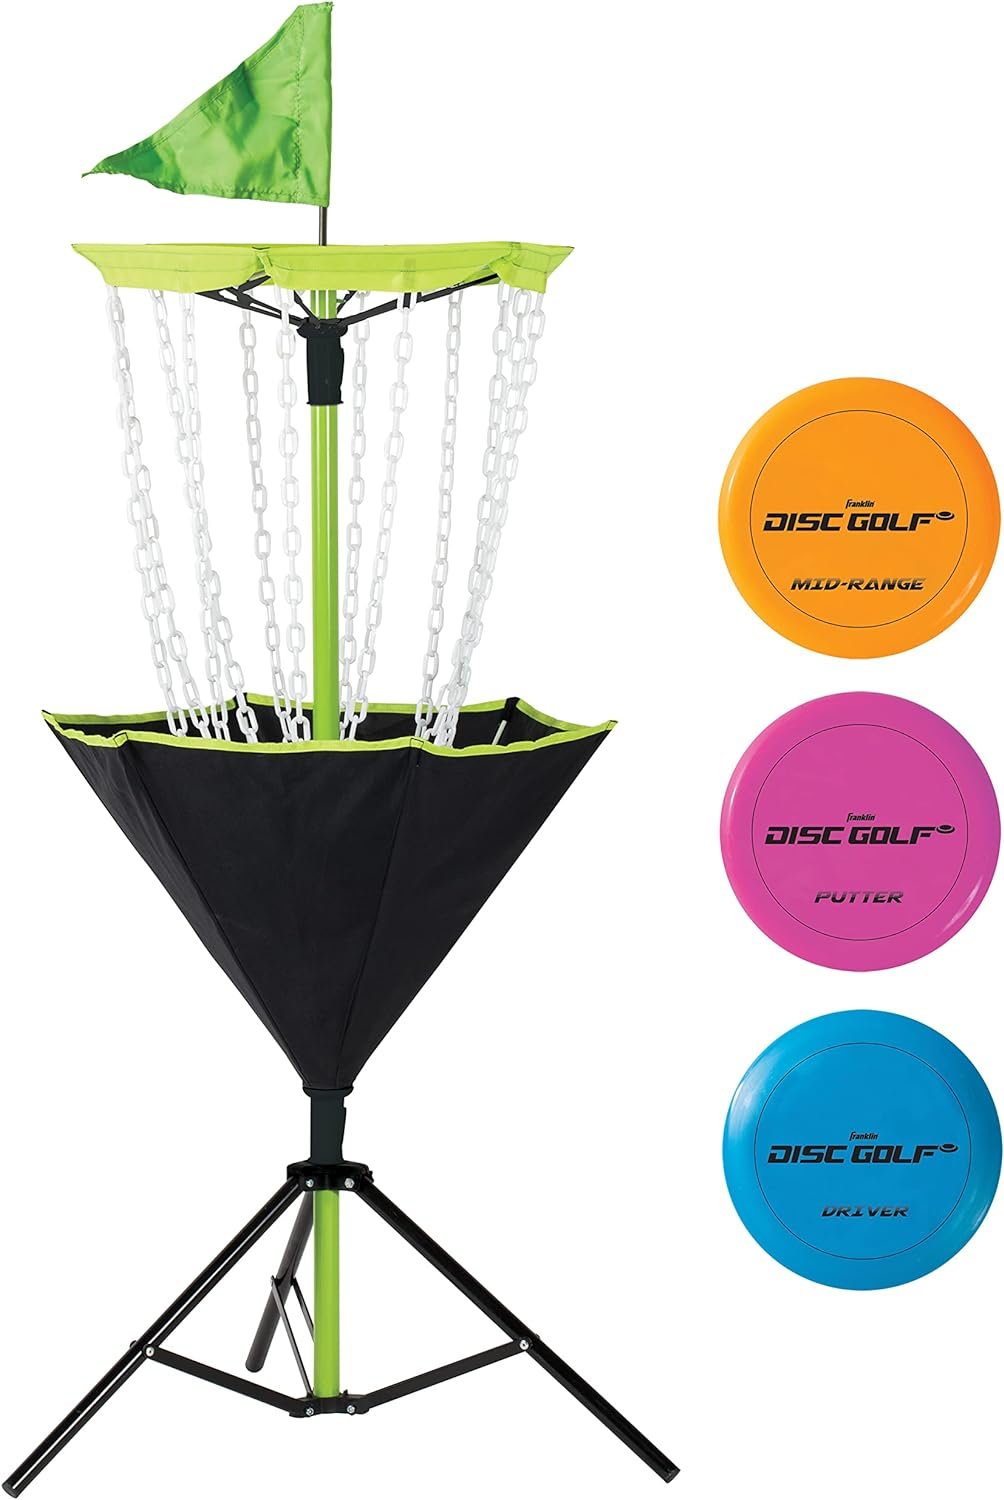 Franklin Sports Disc Golf Baskets - Portable Disc Golf Target with Chains Included - Disc Golf Basket Stand Equipment for Hole + Course Creation